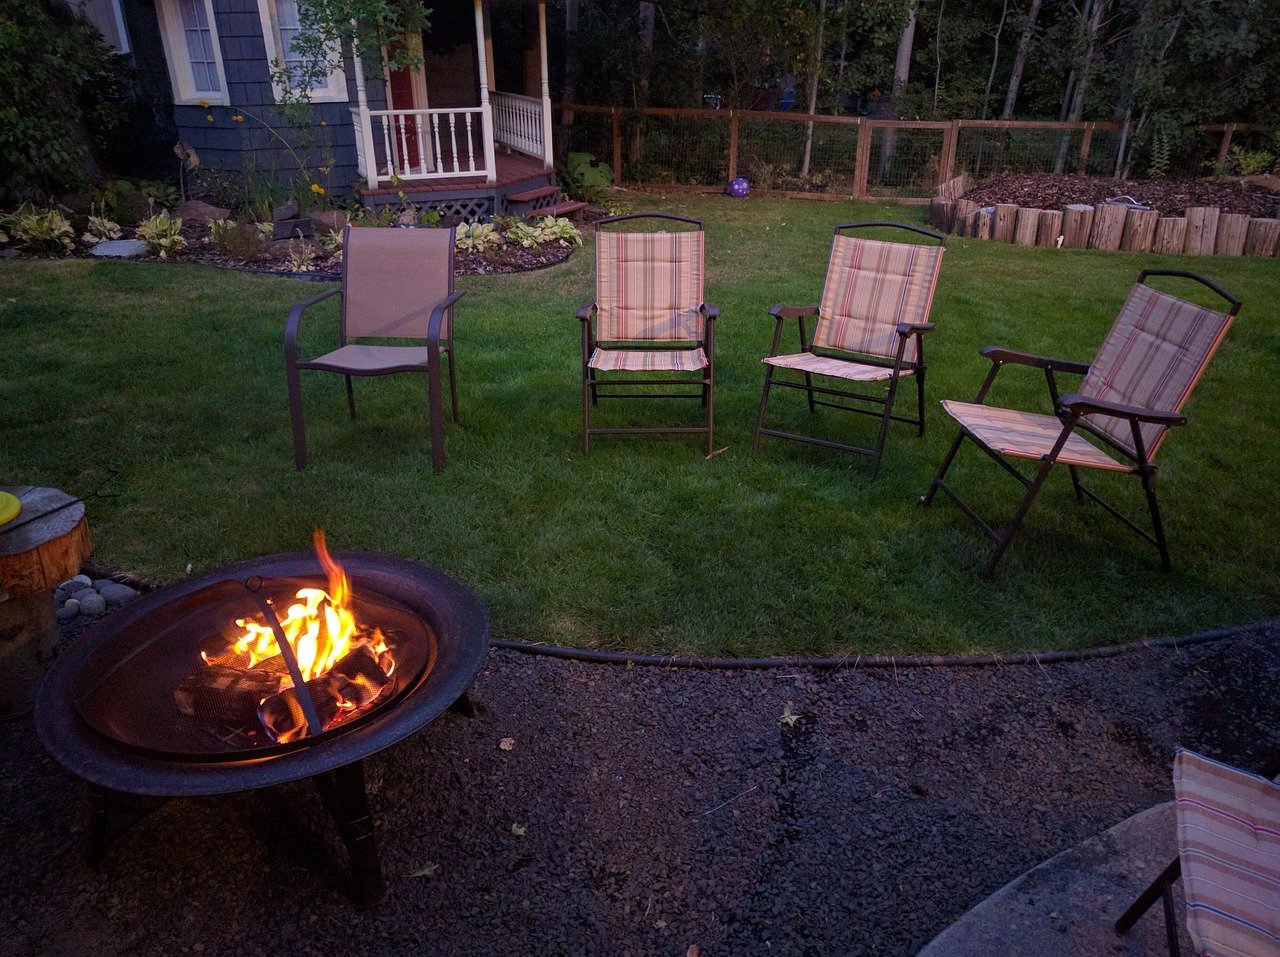 View of a backyard with a fire pit in the bottom left corner, 4 lawn chairs on the lawn, and a house in the background